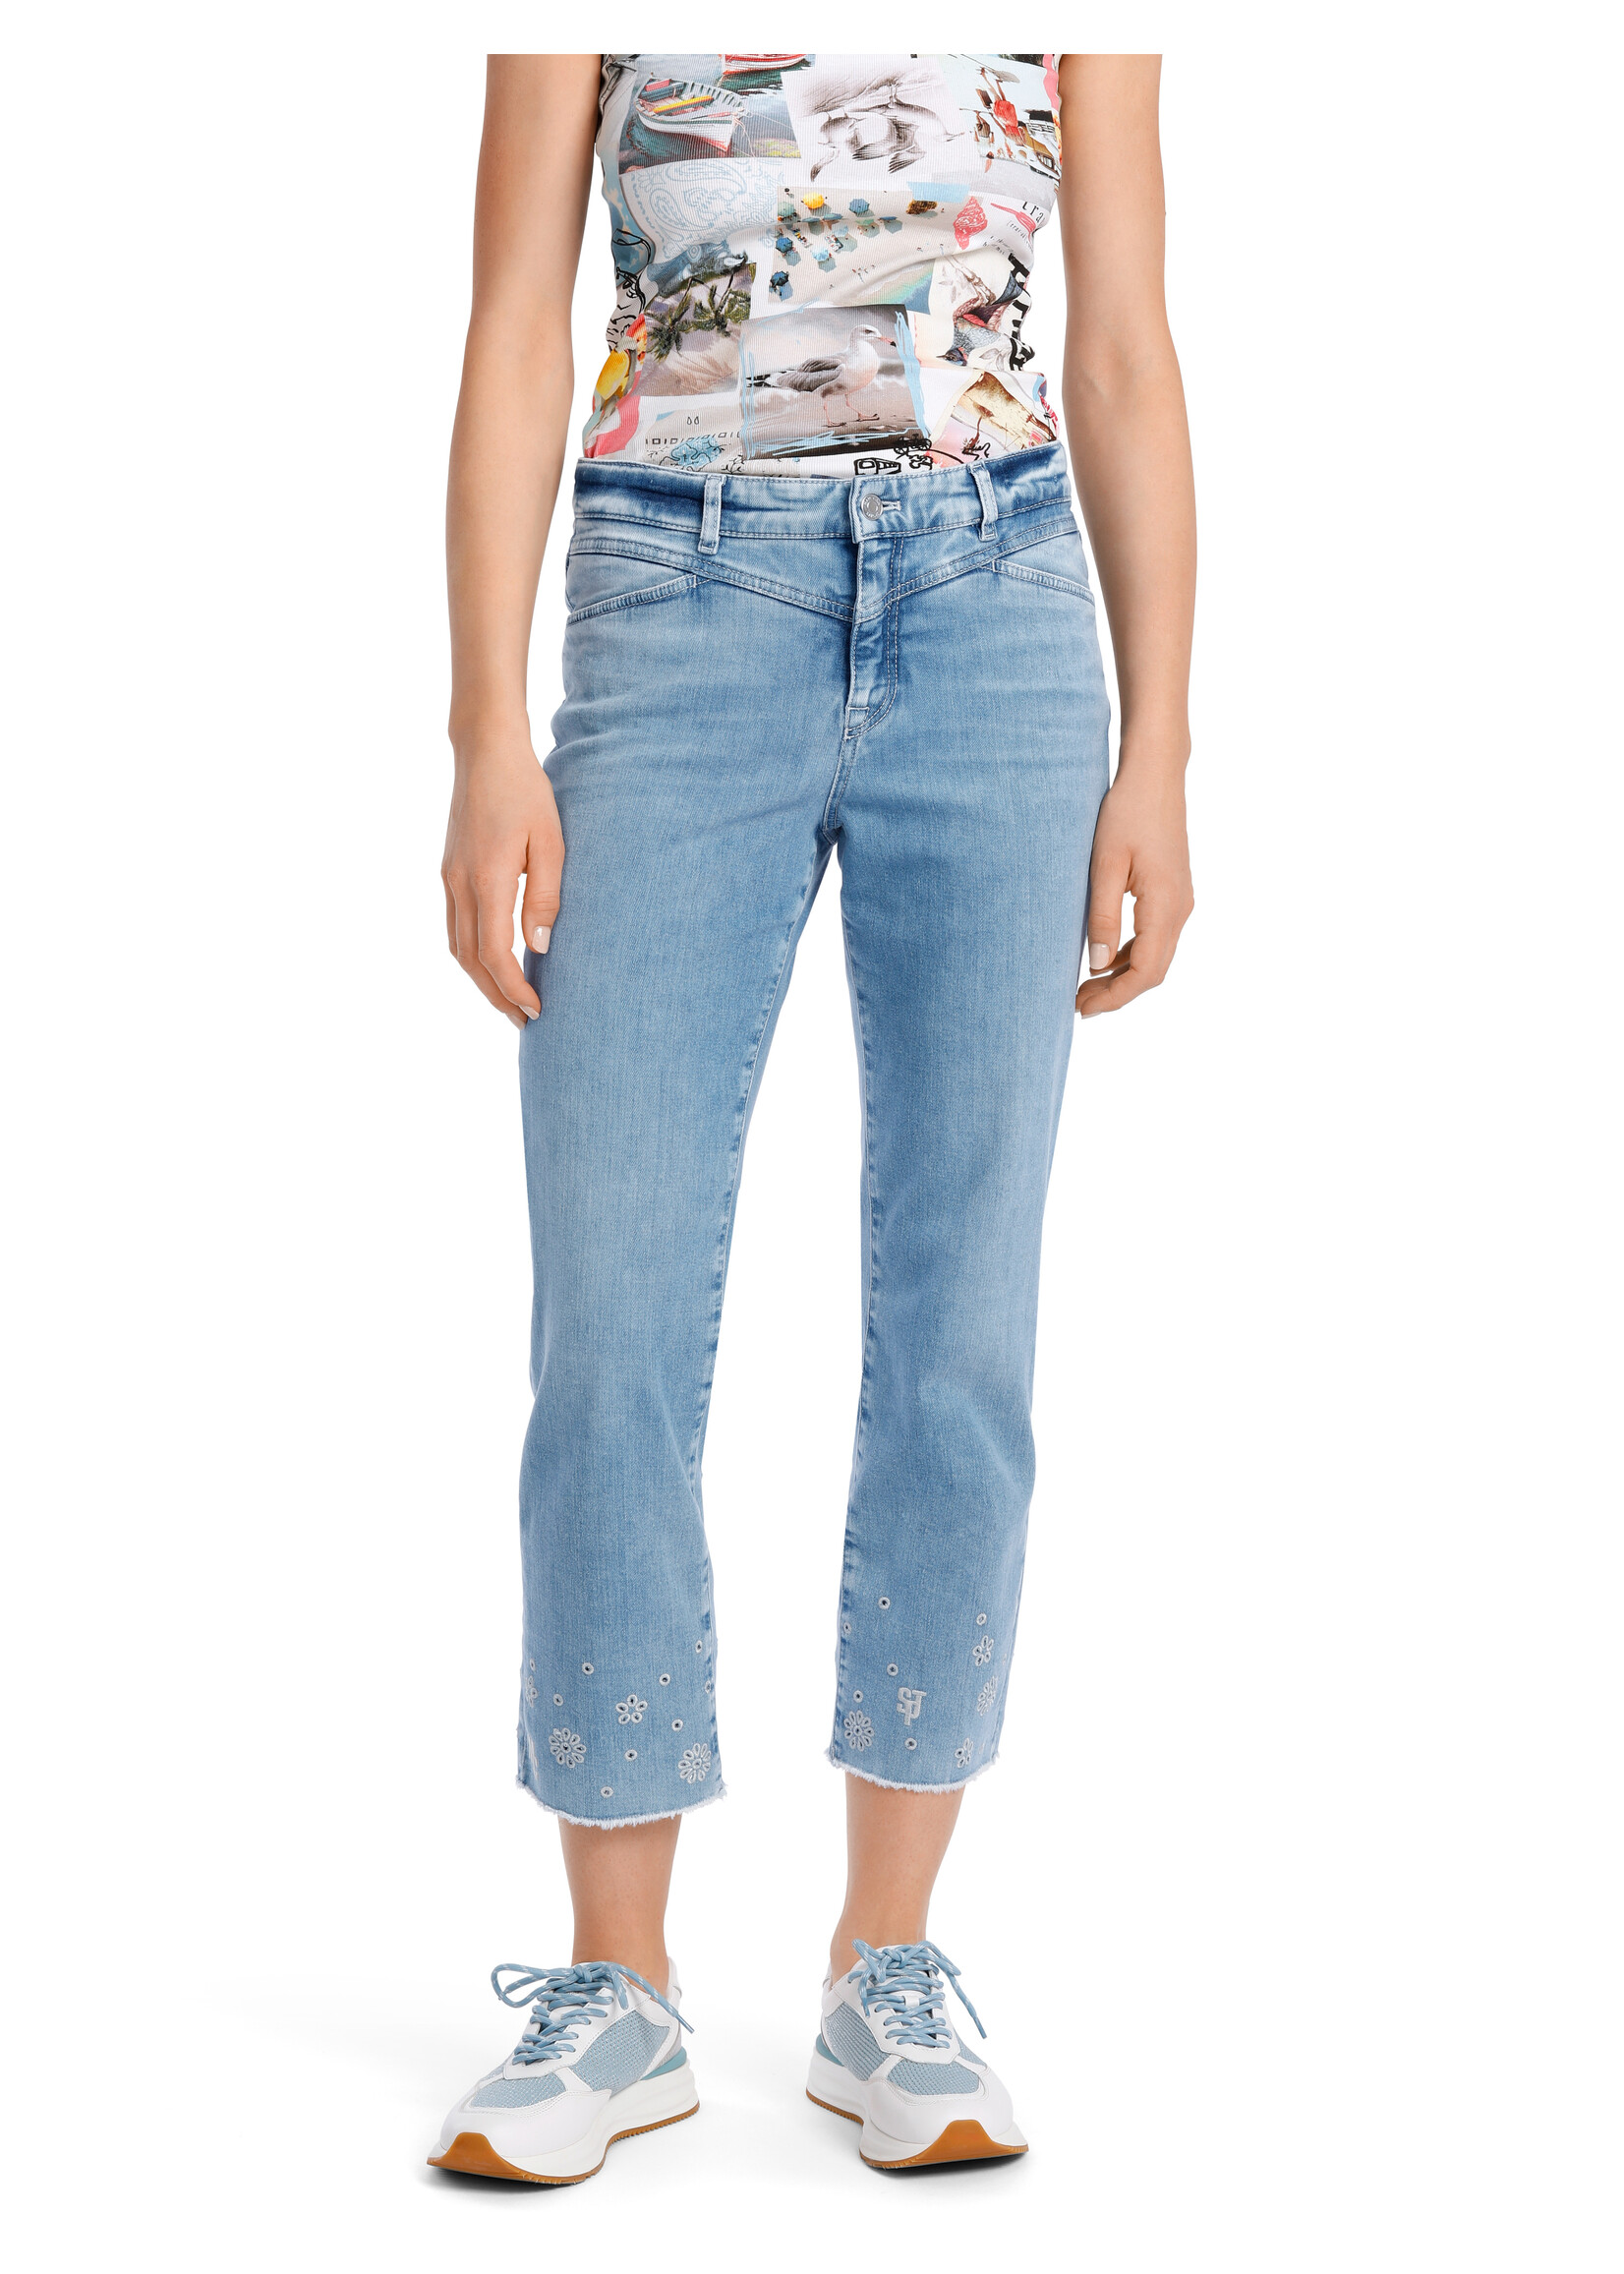 Marccain Sports Jeans WS 82.24 D15 350